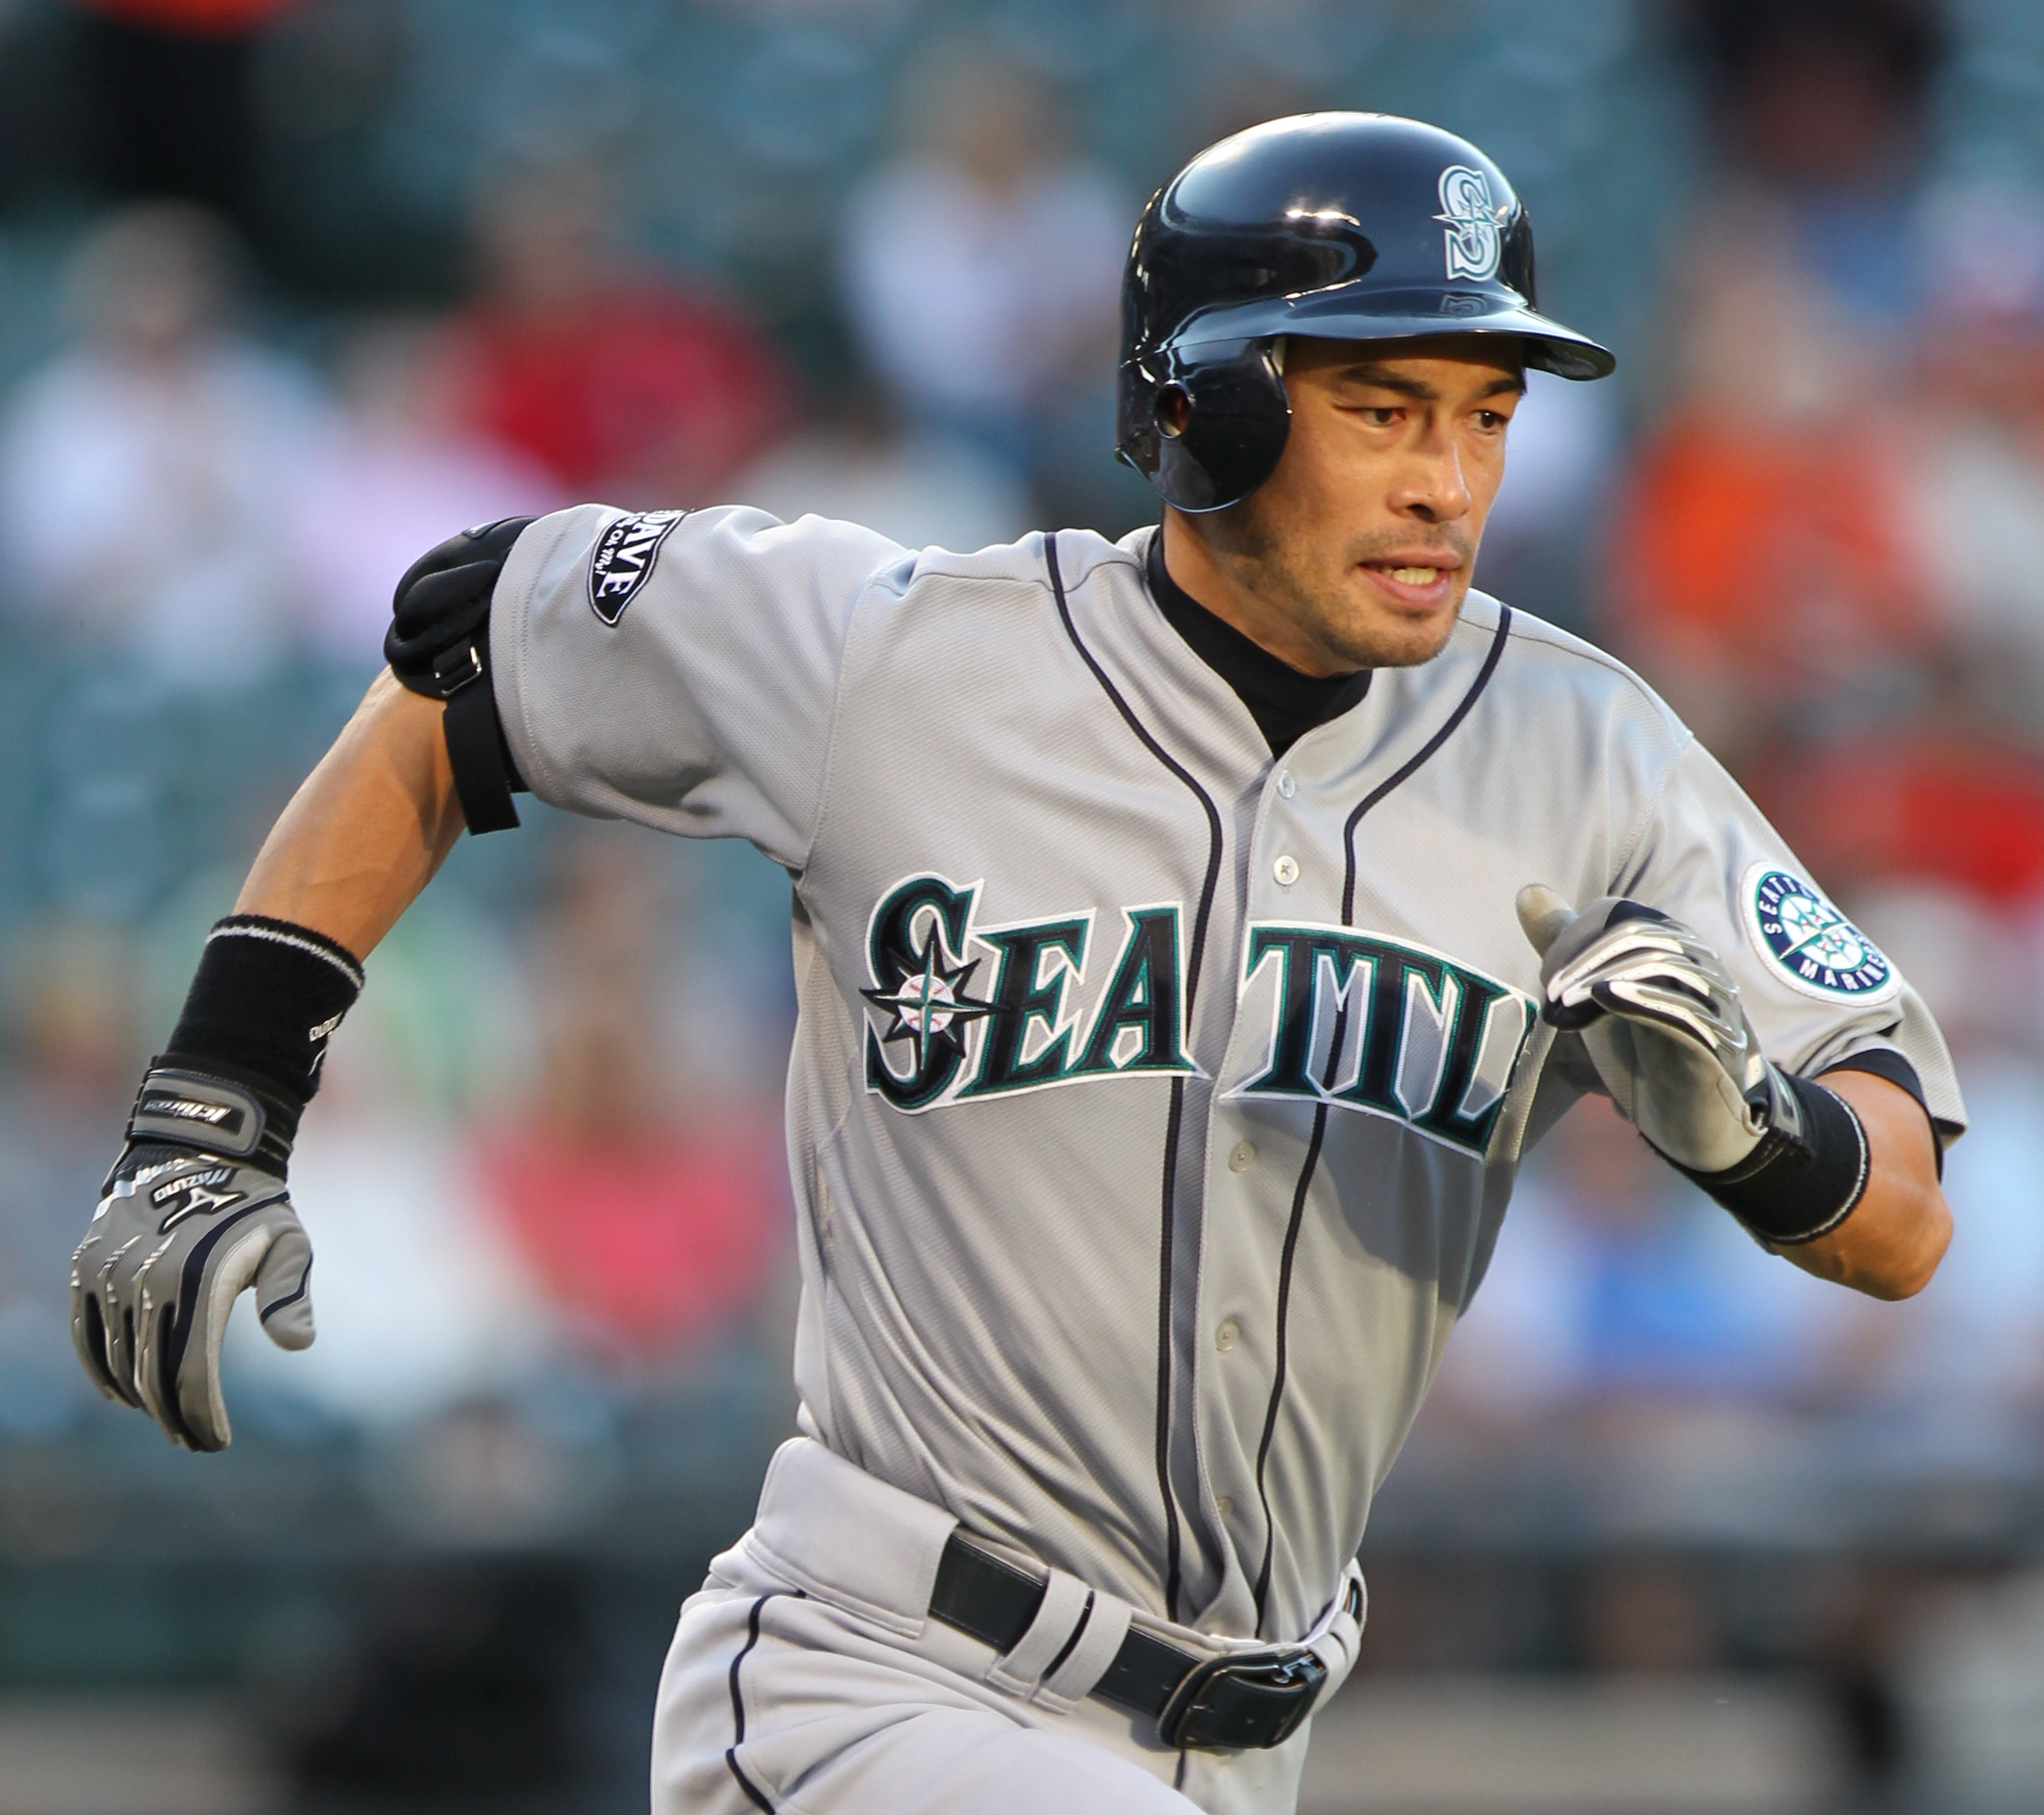 The Seattle Mariners gave Ichiro Suzuki the number 51--the same number that Randy Johnson used to wear. Suzuki wrote Johnson a letter promising to not dishonor the number.